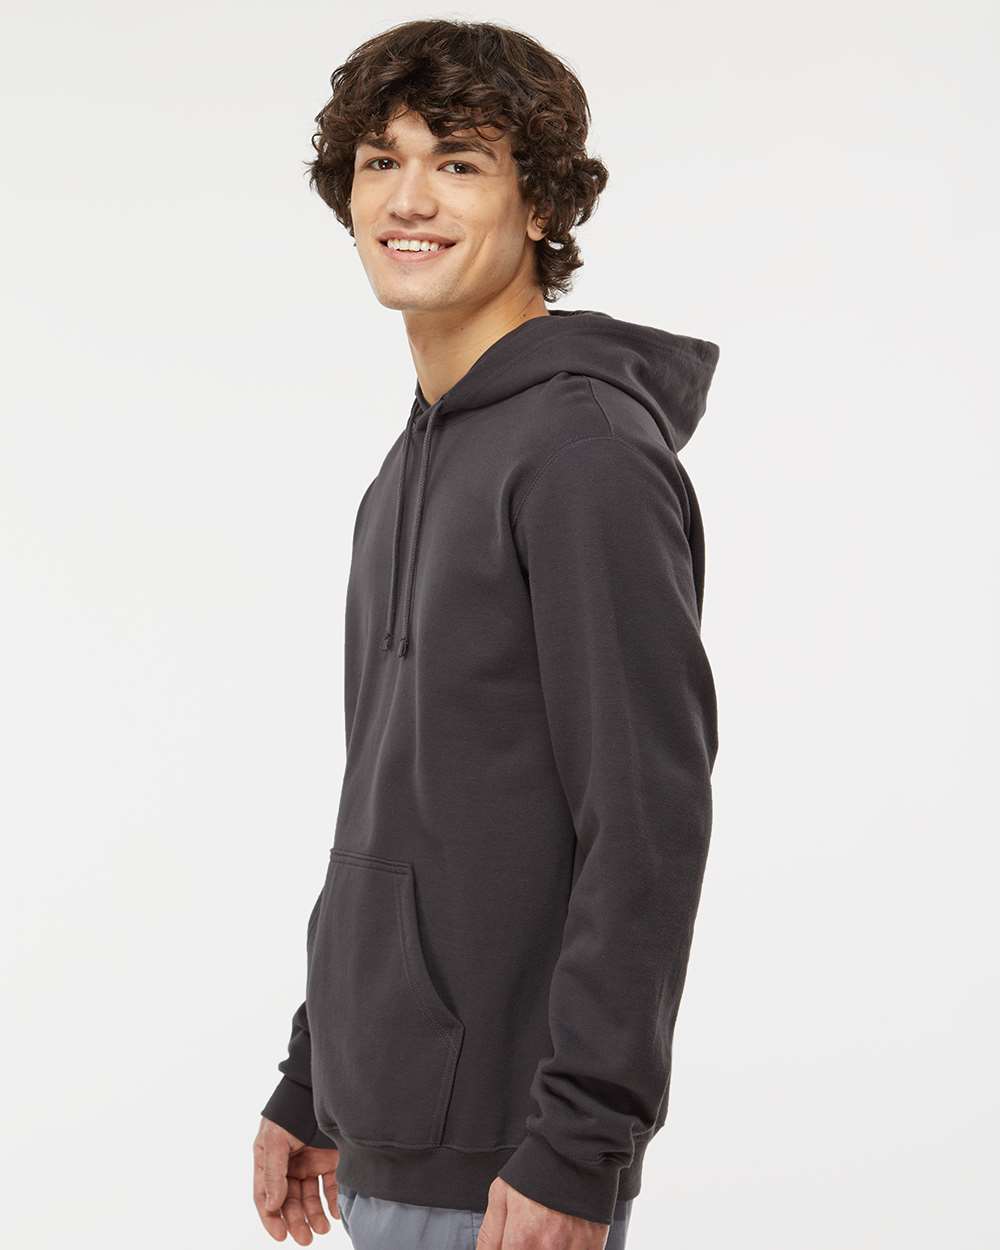 M&O Unisex Pullover Hoodie 3320 #colormdl_Iron